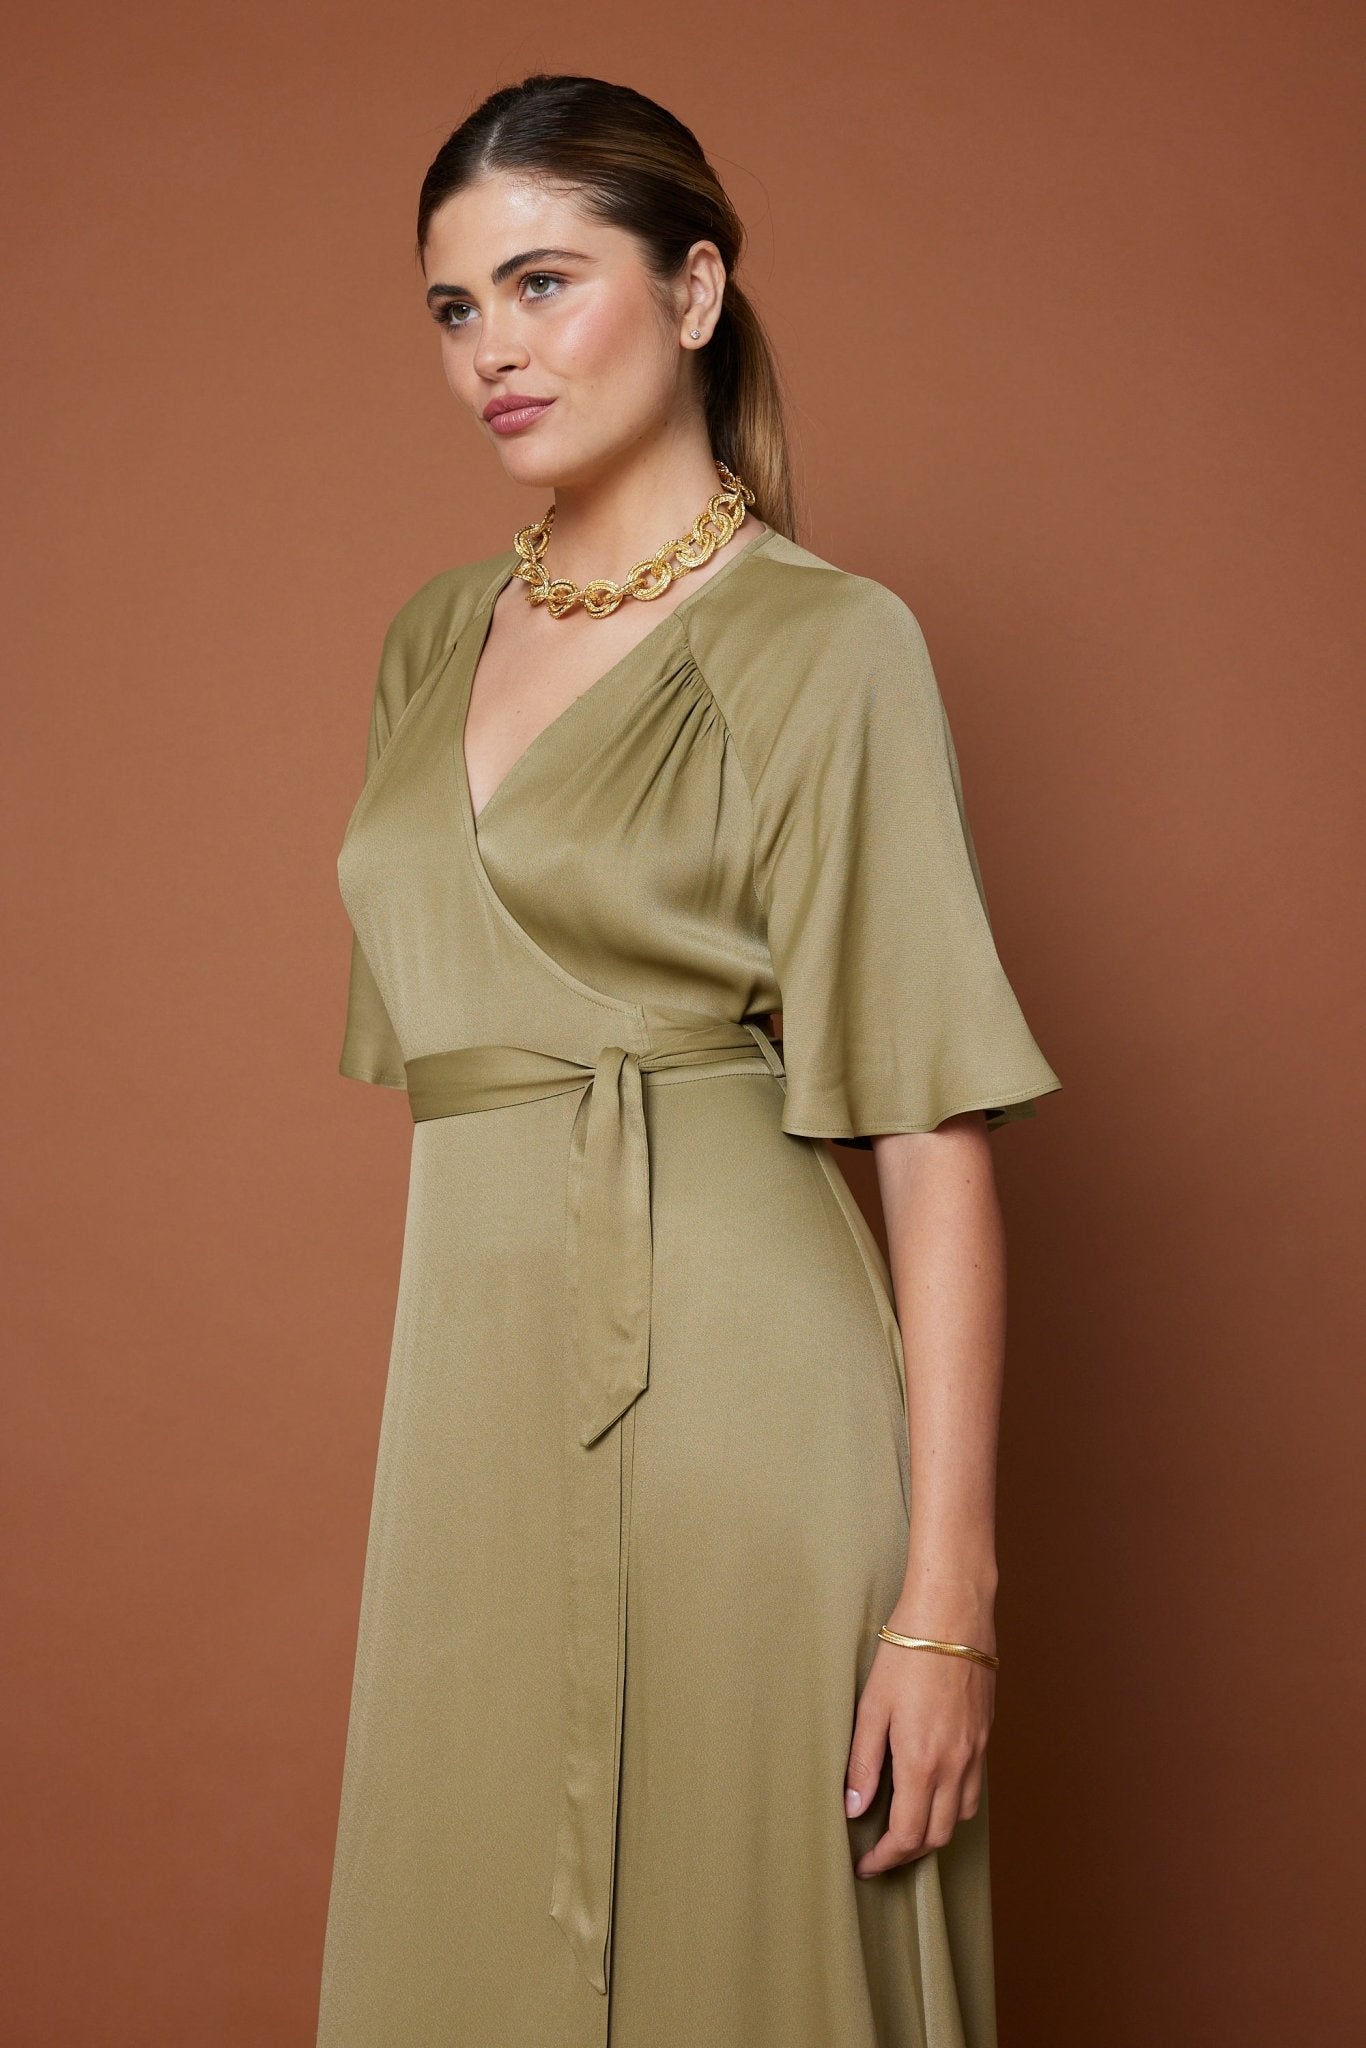 Margot Satin Wrap Dress - Olive Green NEW - Maids to Measure